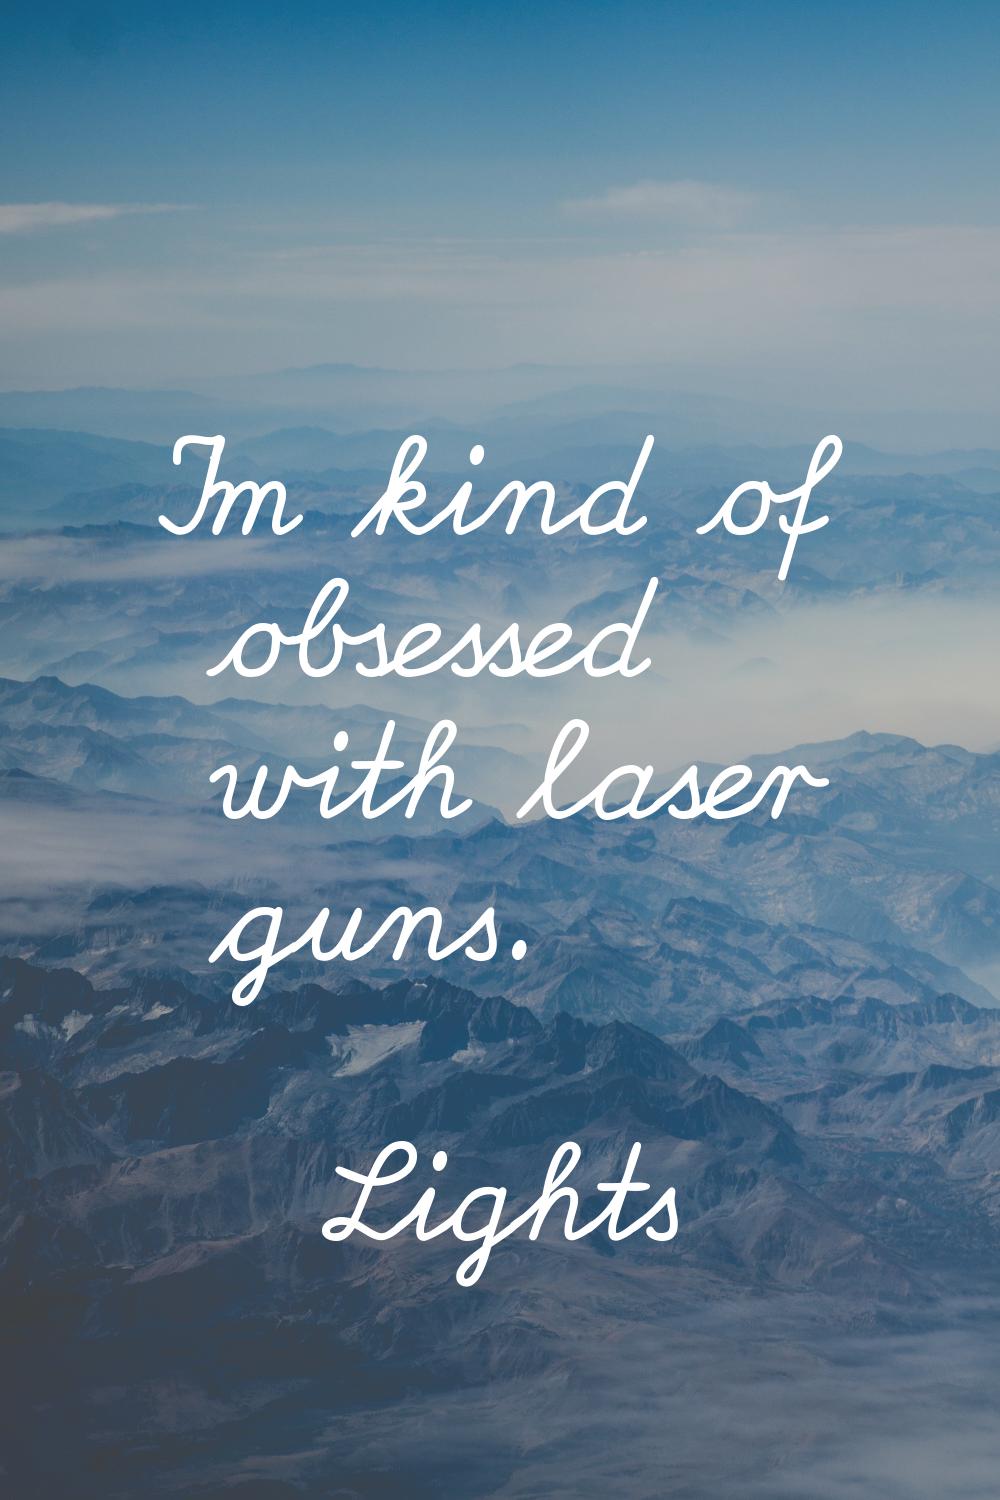 I'm kind of obsessed with laser guns.